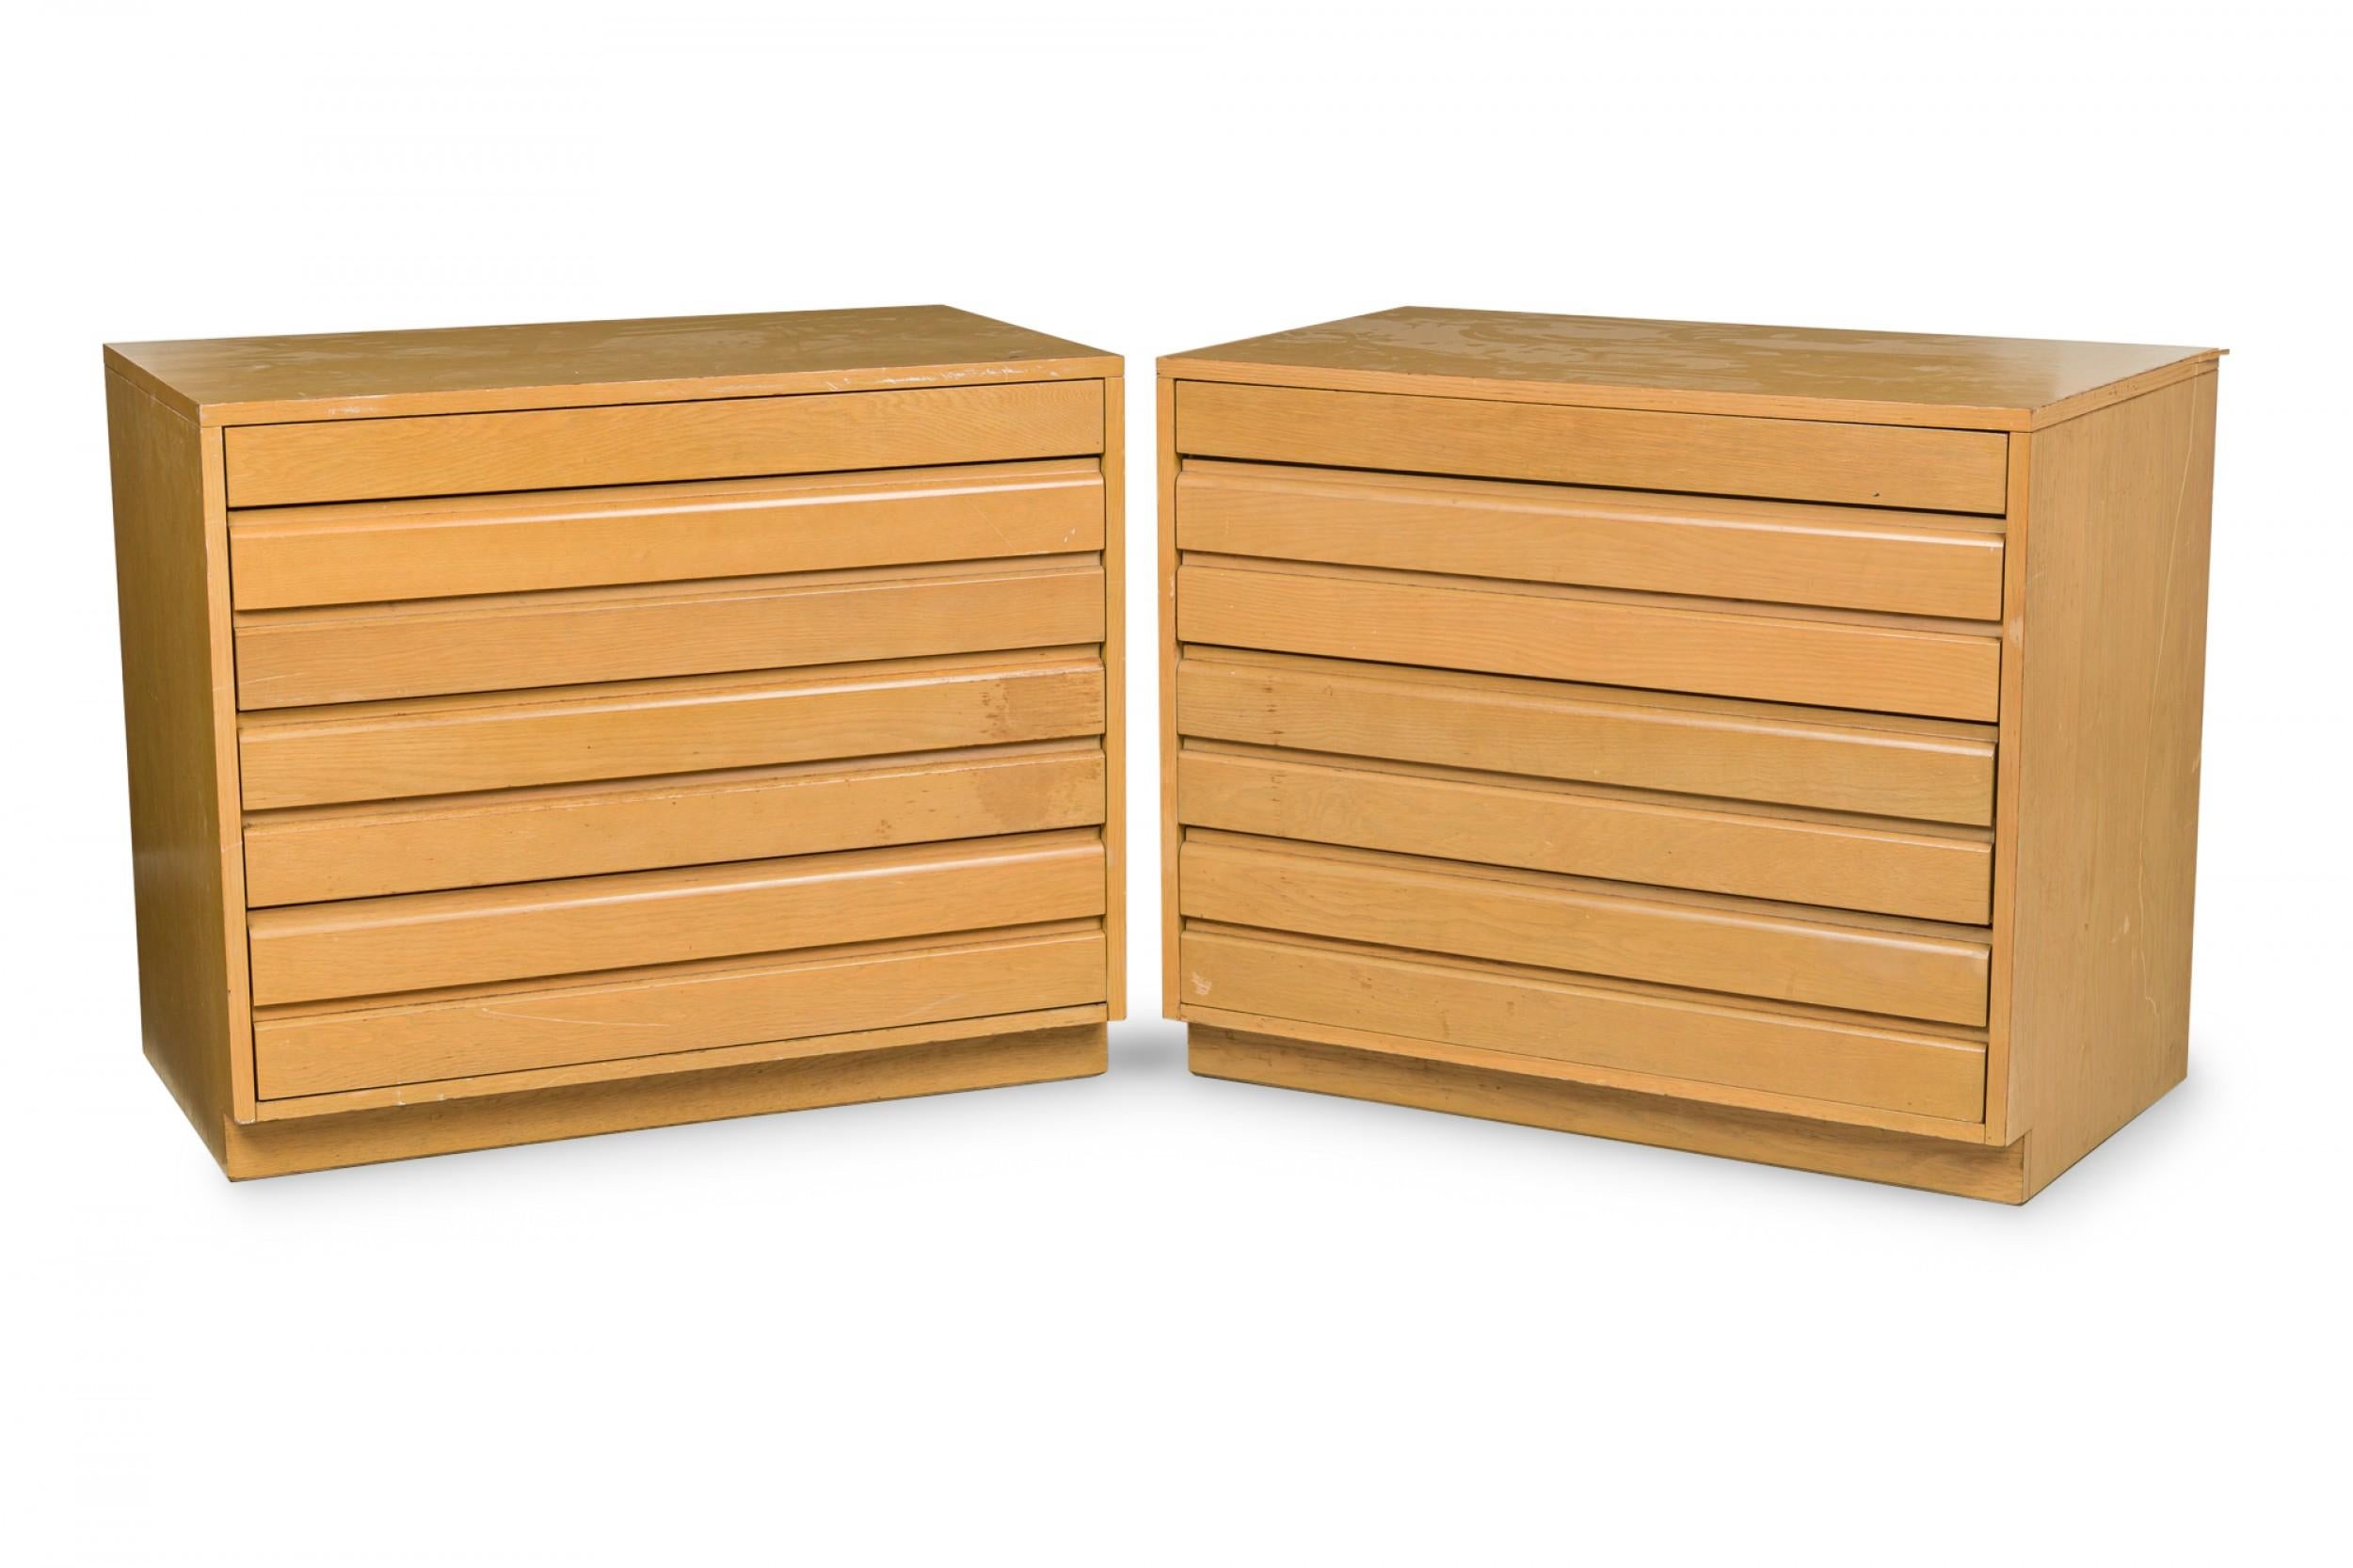 20th Century Pair of Sligh Furniture American Modern Chest of Drawers / Nightstands For Sale